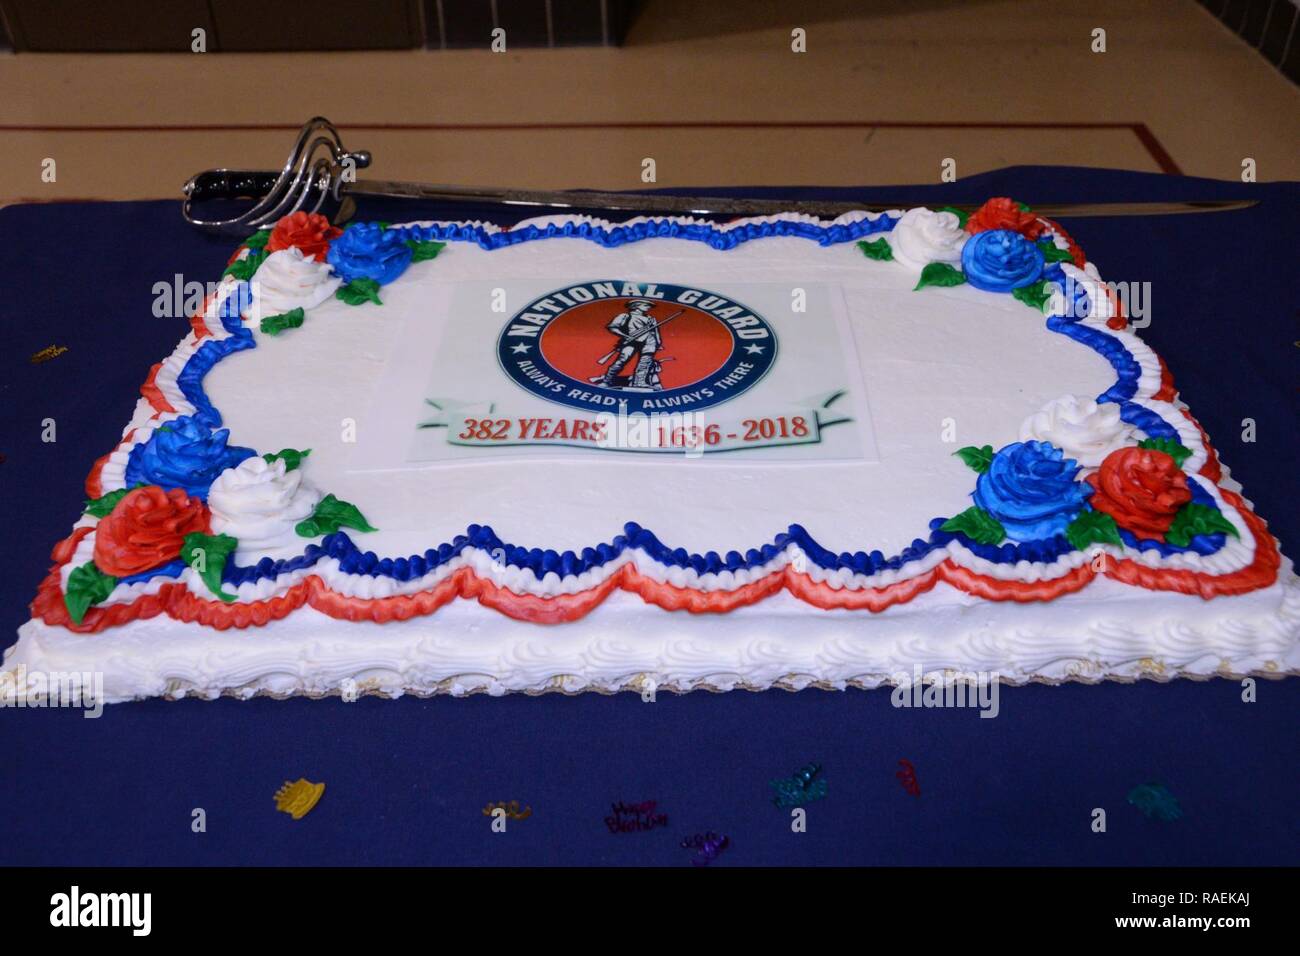 A birthday cake commemorating the National Guard's 382nd Birthday is ready for a ceremonial cake cutting at New York National Guard Headquarters in Latham, N.Y. on Thursday, Dec. 13, 2018. New York National Guard members and employees of the New York State Division of Military and Naval Affairs made time for a short ceremony to mark the National Guard's 382nd Birthday . ( U.S. Army National Guard Stock Photo